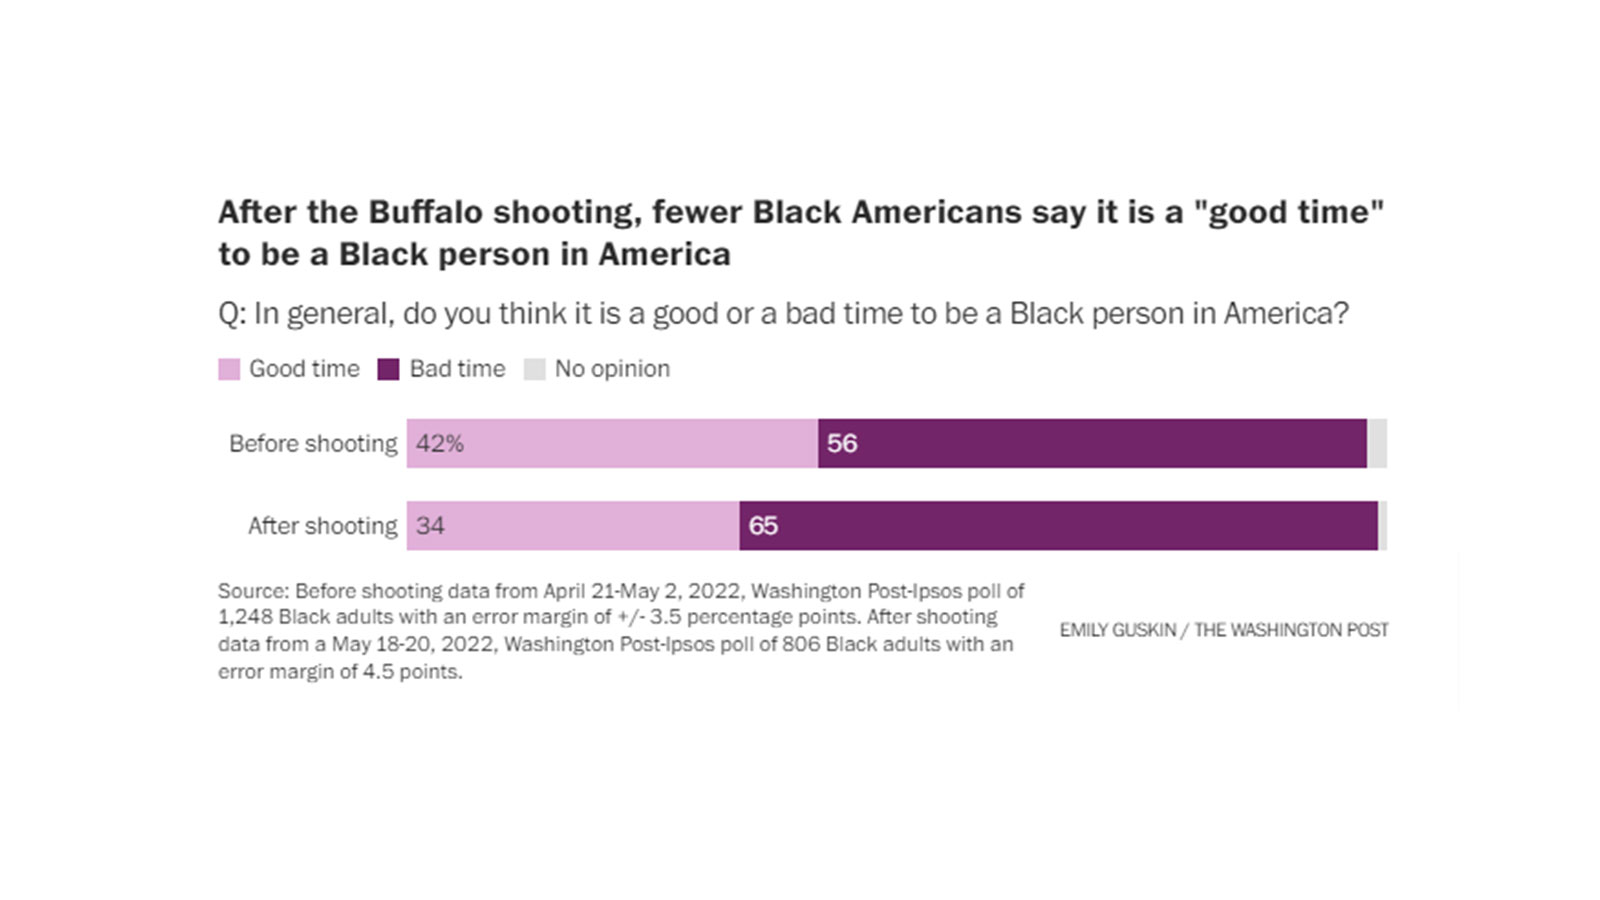 After the Buffalo shooting, fewer Black Americans say it is a "good time" to be a Black person in America